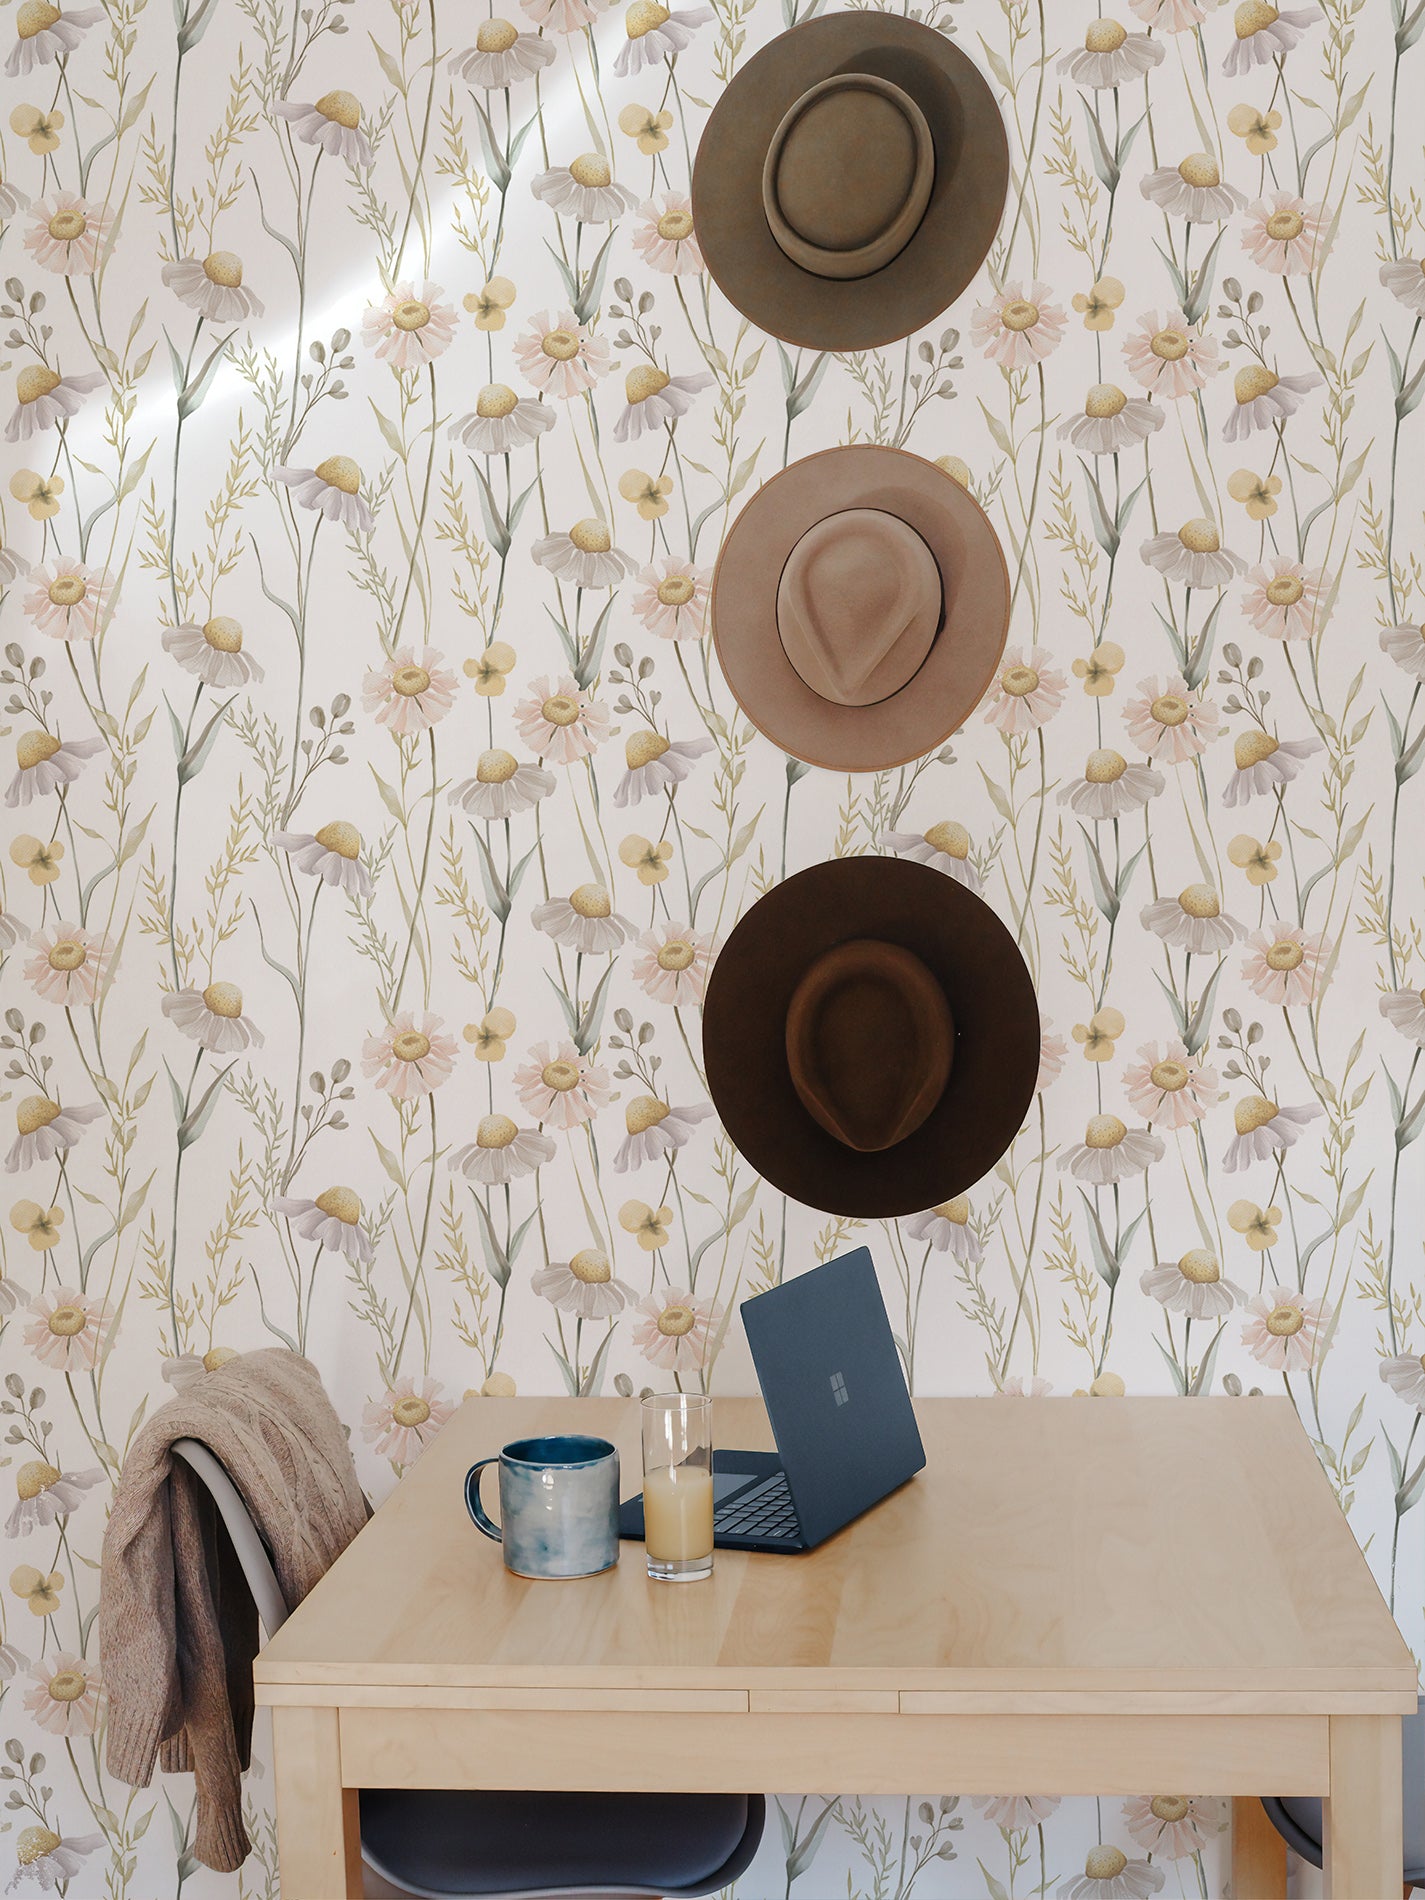 A creative workspace with Watercolour Daisy Wallpaper providing a refreshing and artistic backdrop. The wall is adorned with various hats, suggesting a personal touch, while a simple desk with a laptop, a mug, and a draped sweater add to the lived-in warmth of the space.